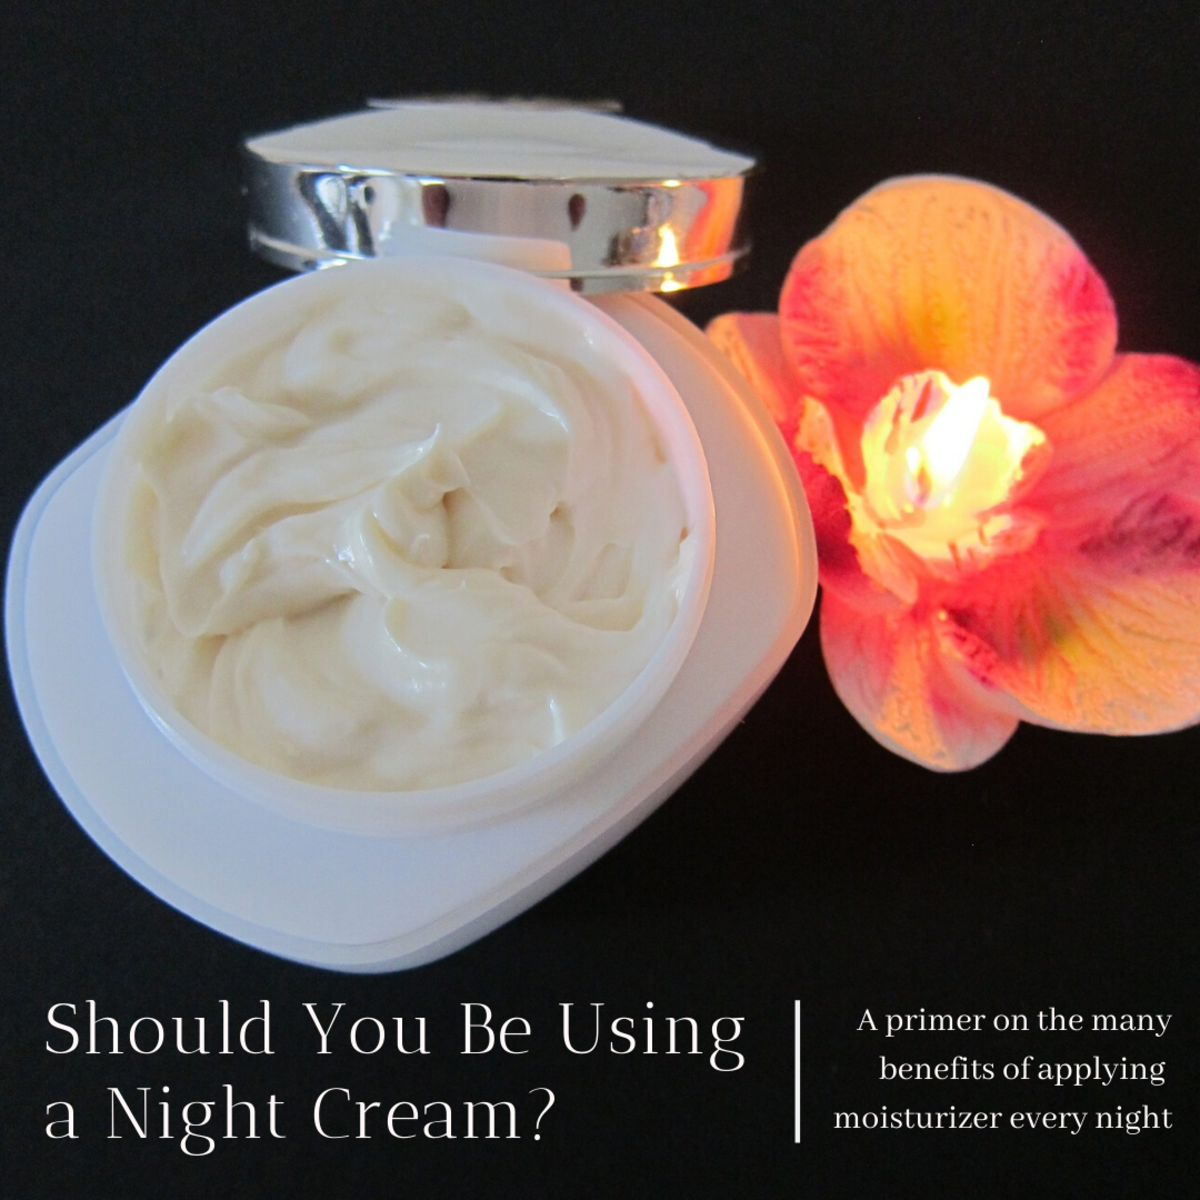 This article will break down the many benefits of night creams and nighttime moisturizing in general—and I will also share my experience of coming to the epiphany that they are indeed quite effective at promoting healthier skin.